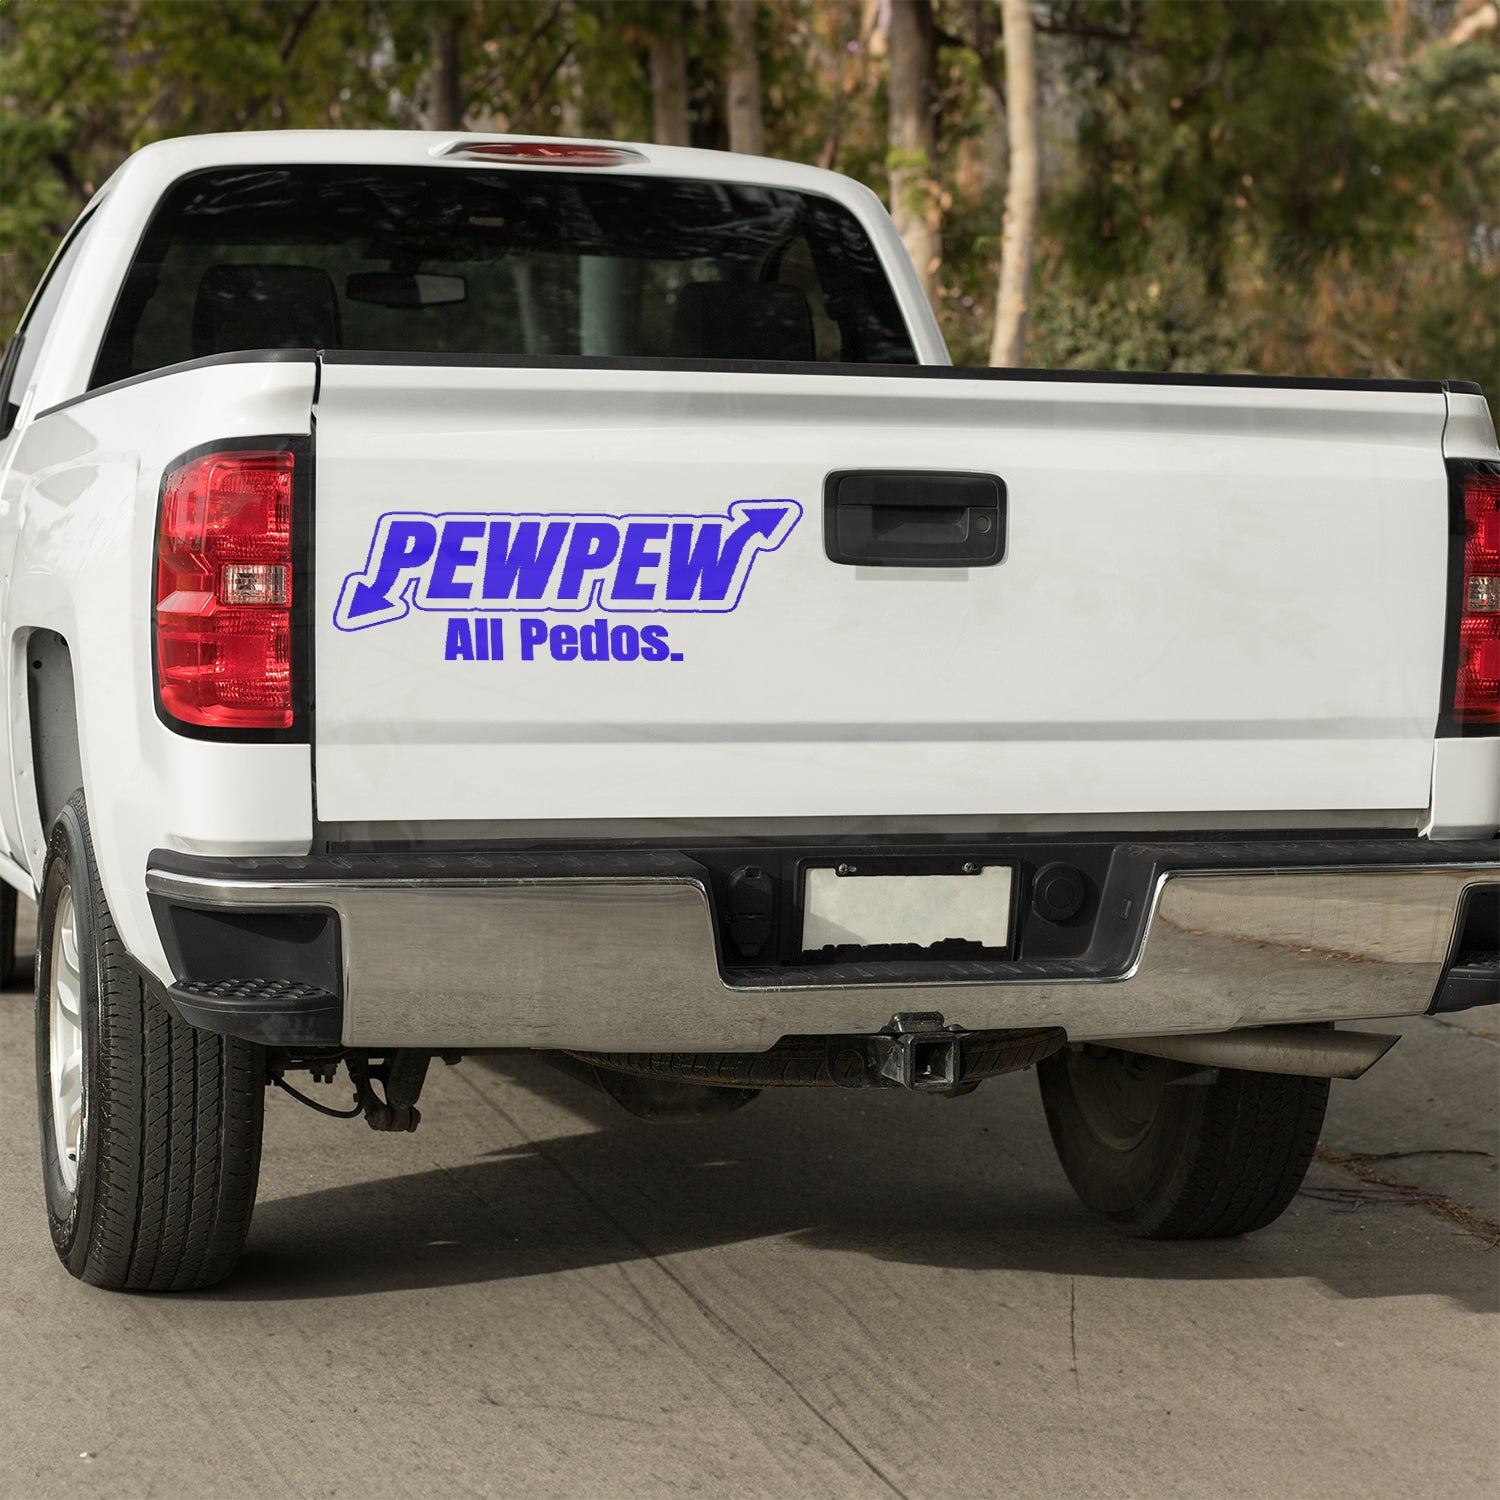 Pew Pew ALL Pedos vinyl decal car decal decal for cars decal for trucks Decals for cars Decals for Trucks decals for tumblers decals for vehicles door decal funny decals p diddy Window decals